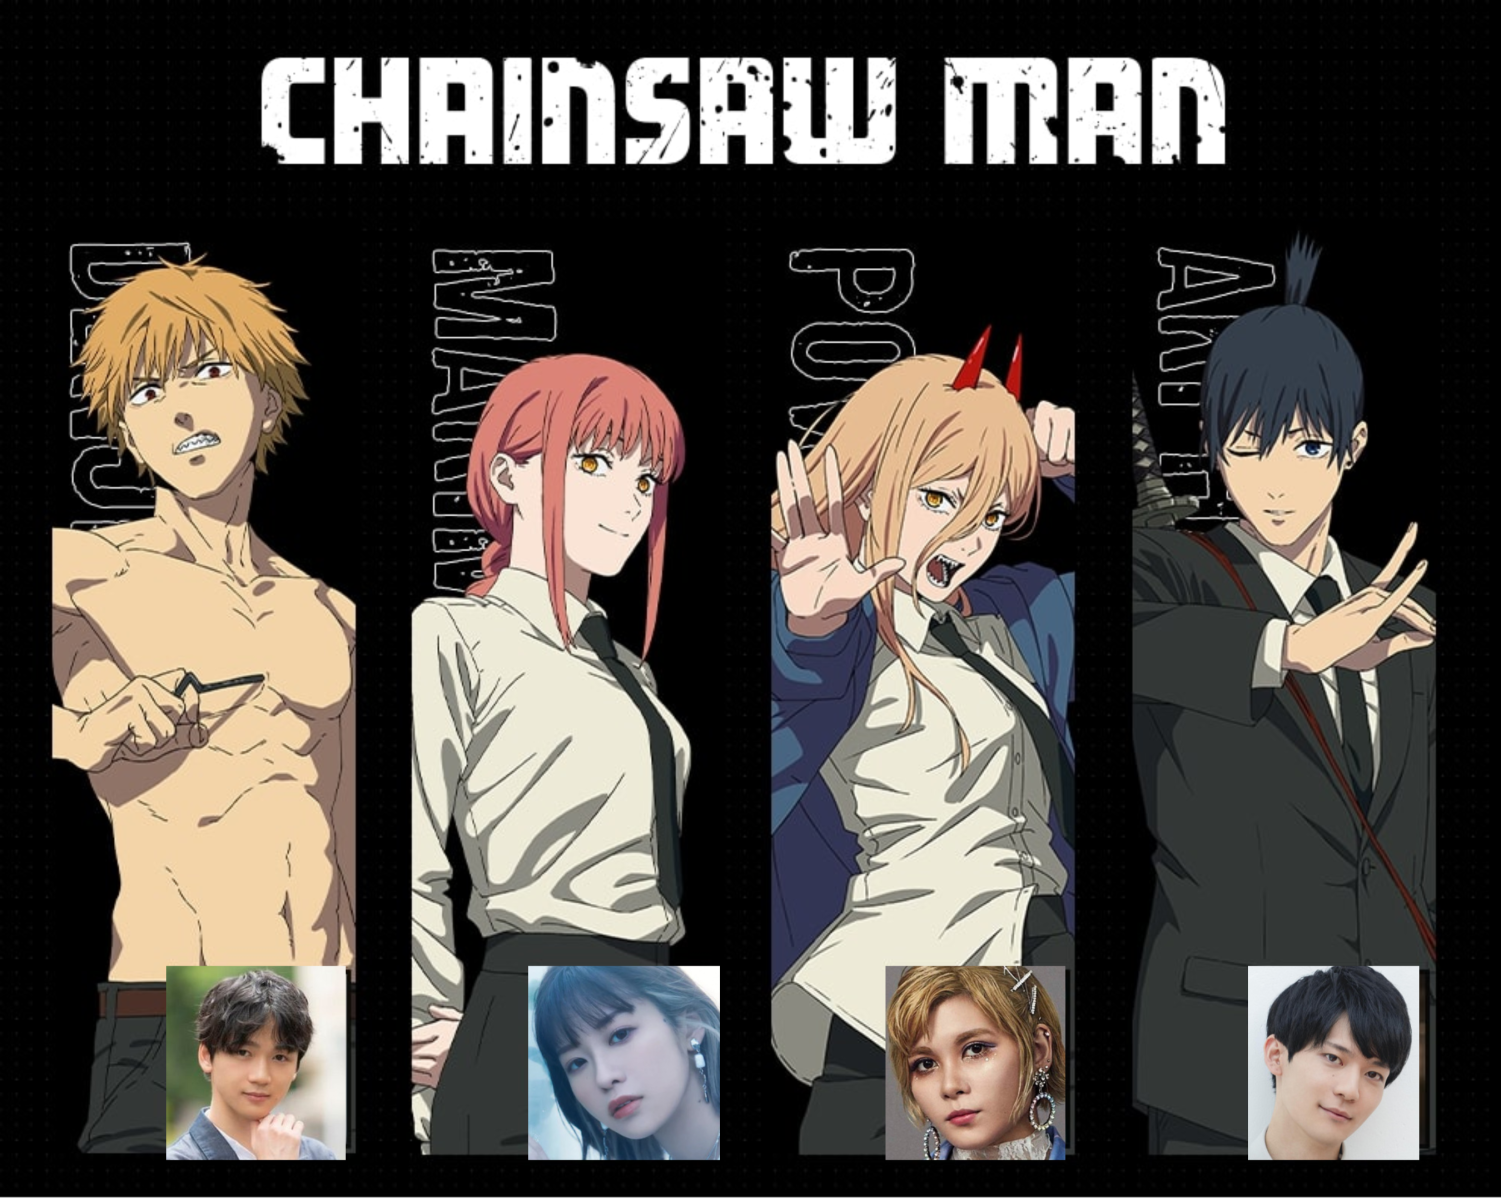 Where to start the Chainsaw Man Manga after watching Season 1 of the anime?